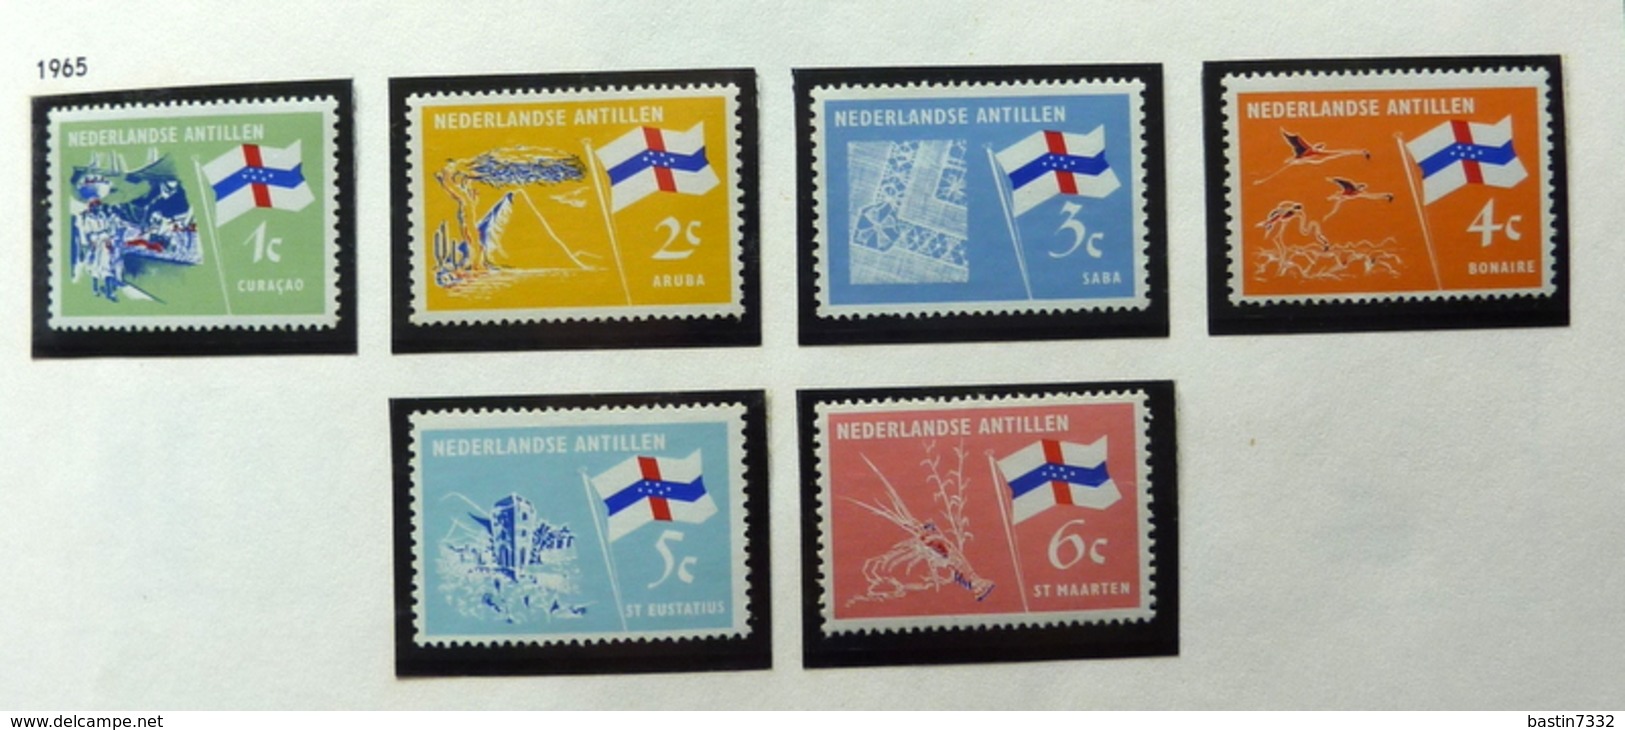 Netherlands Antilles/United Nations/Netherlands/Pays-Bas collection in 3 Davo albums